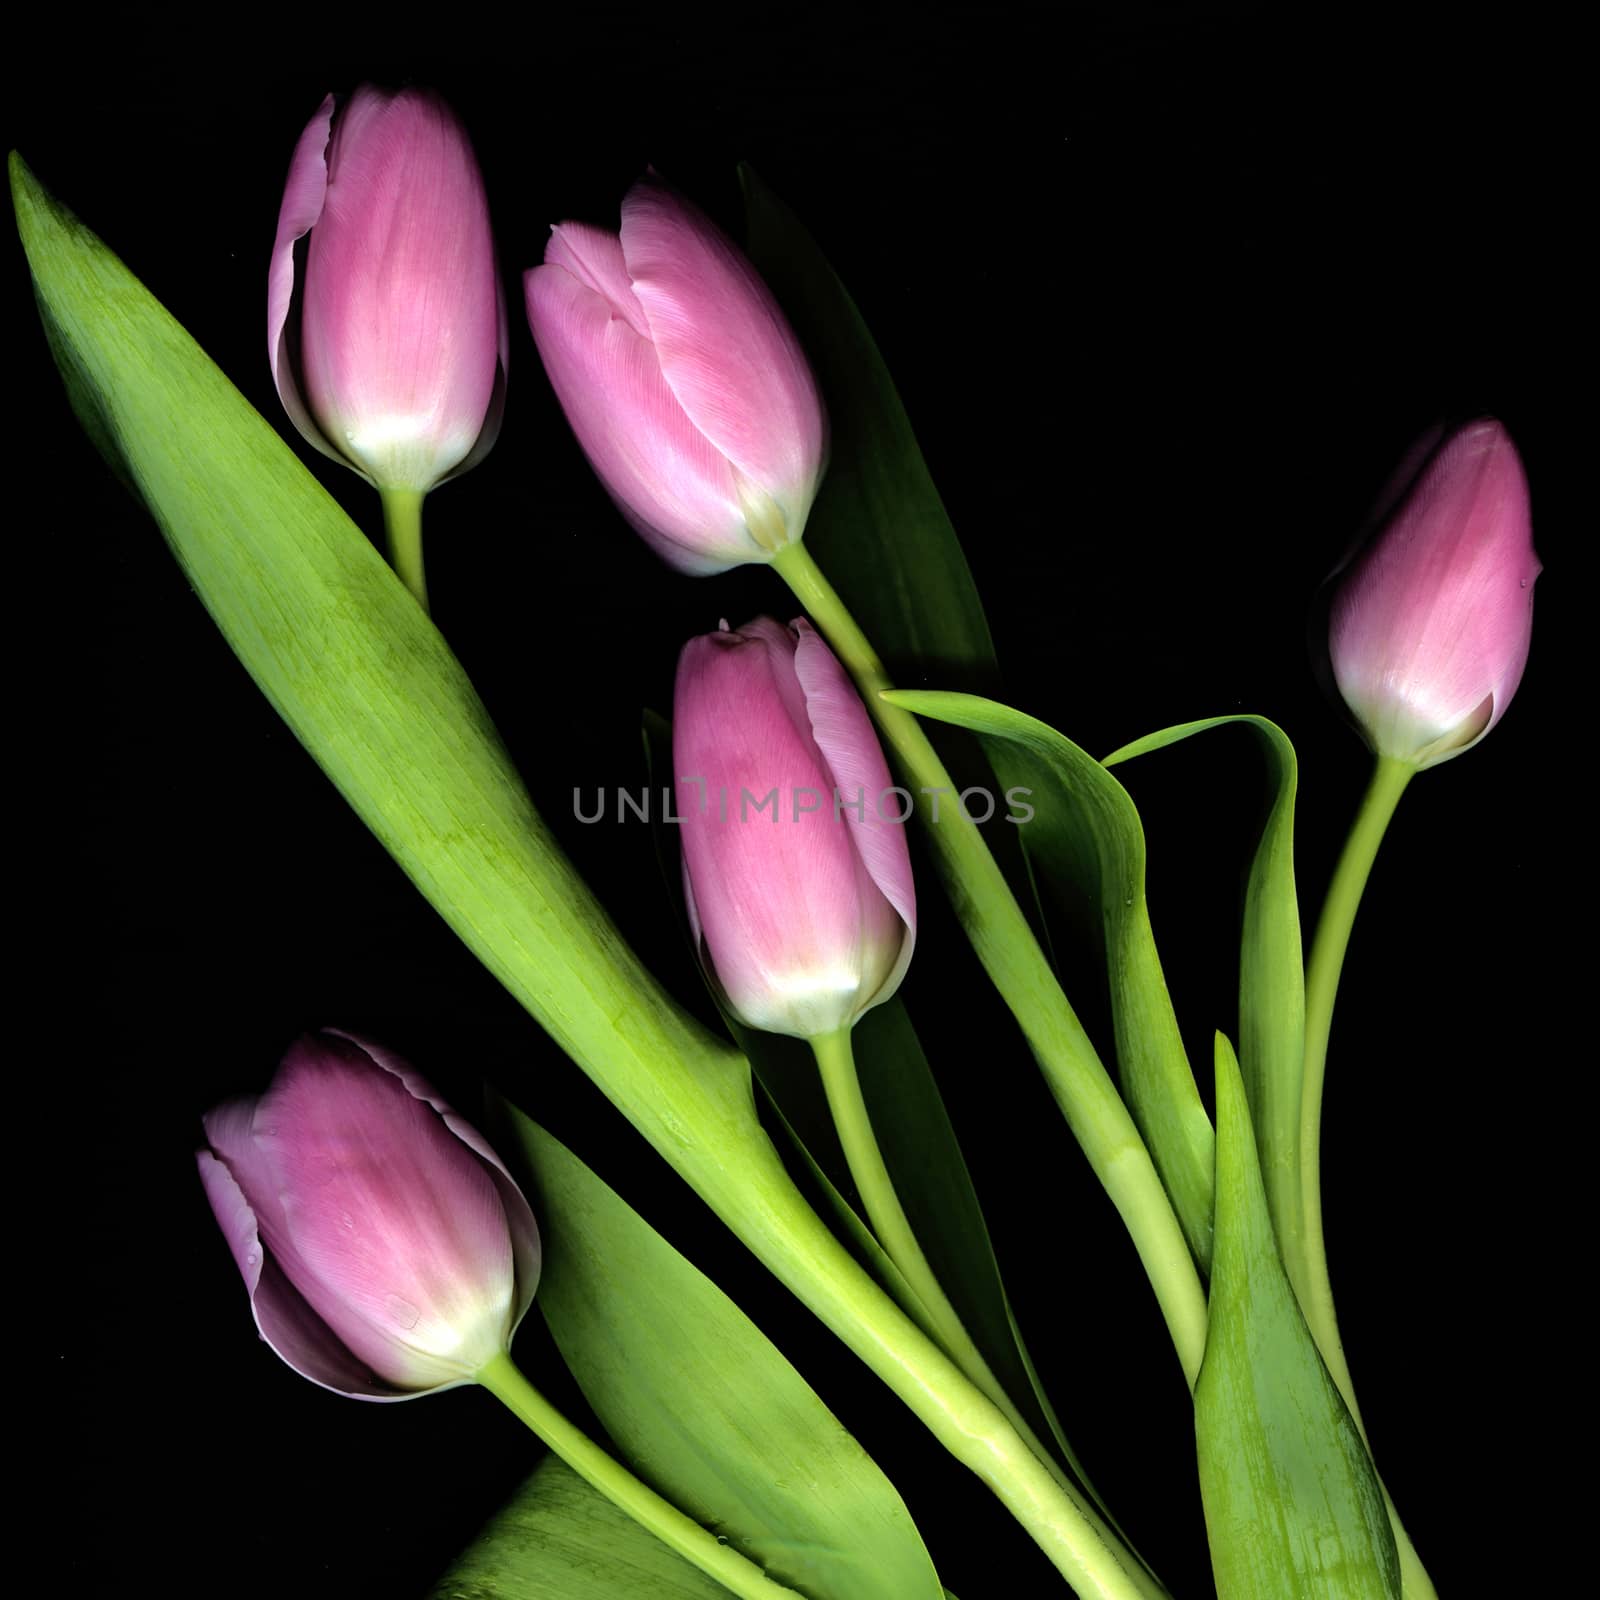 Pink Tulips in studio study in close up by george_stevenson